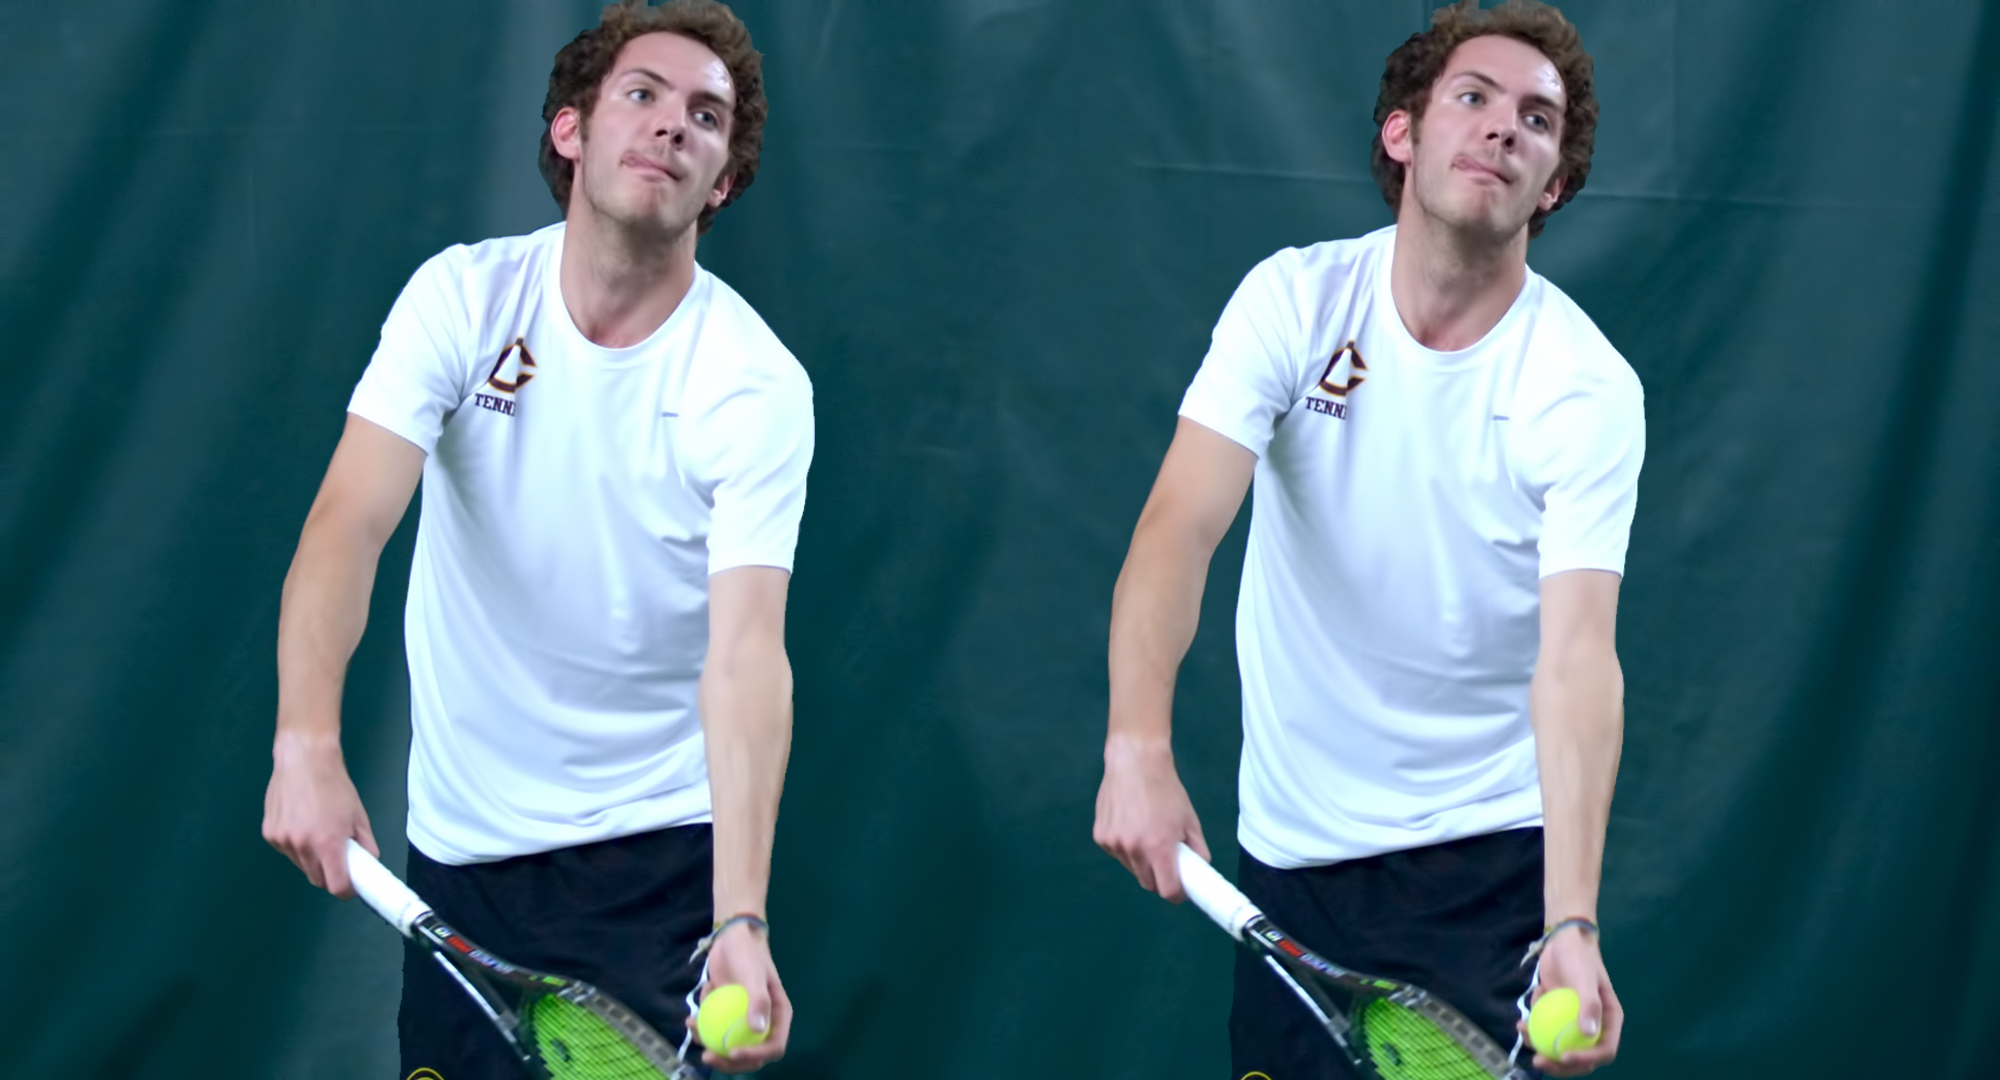 Senior David Schneck was one of five Cobbers to win two singles matches on the opening weekend of the year.